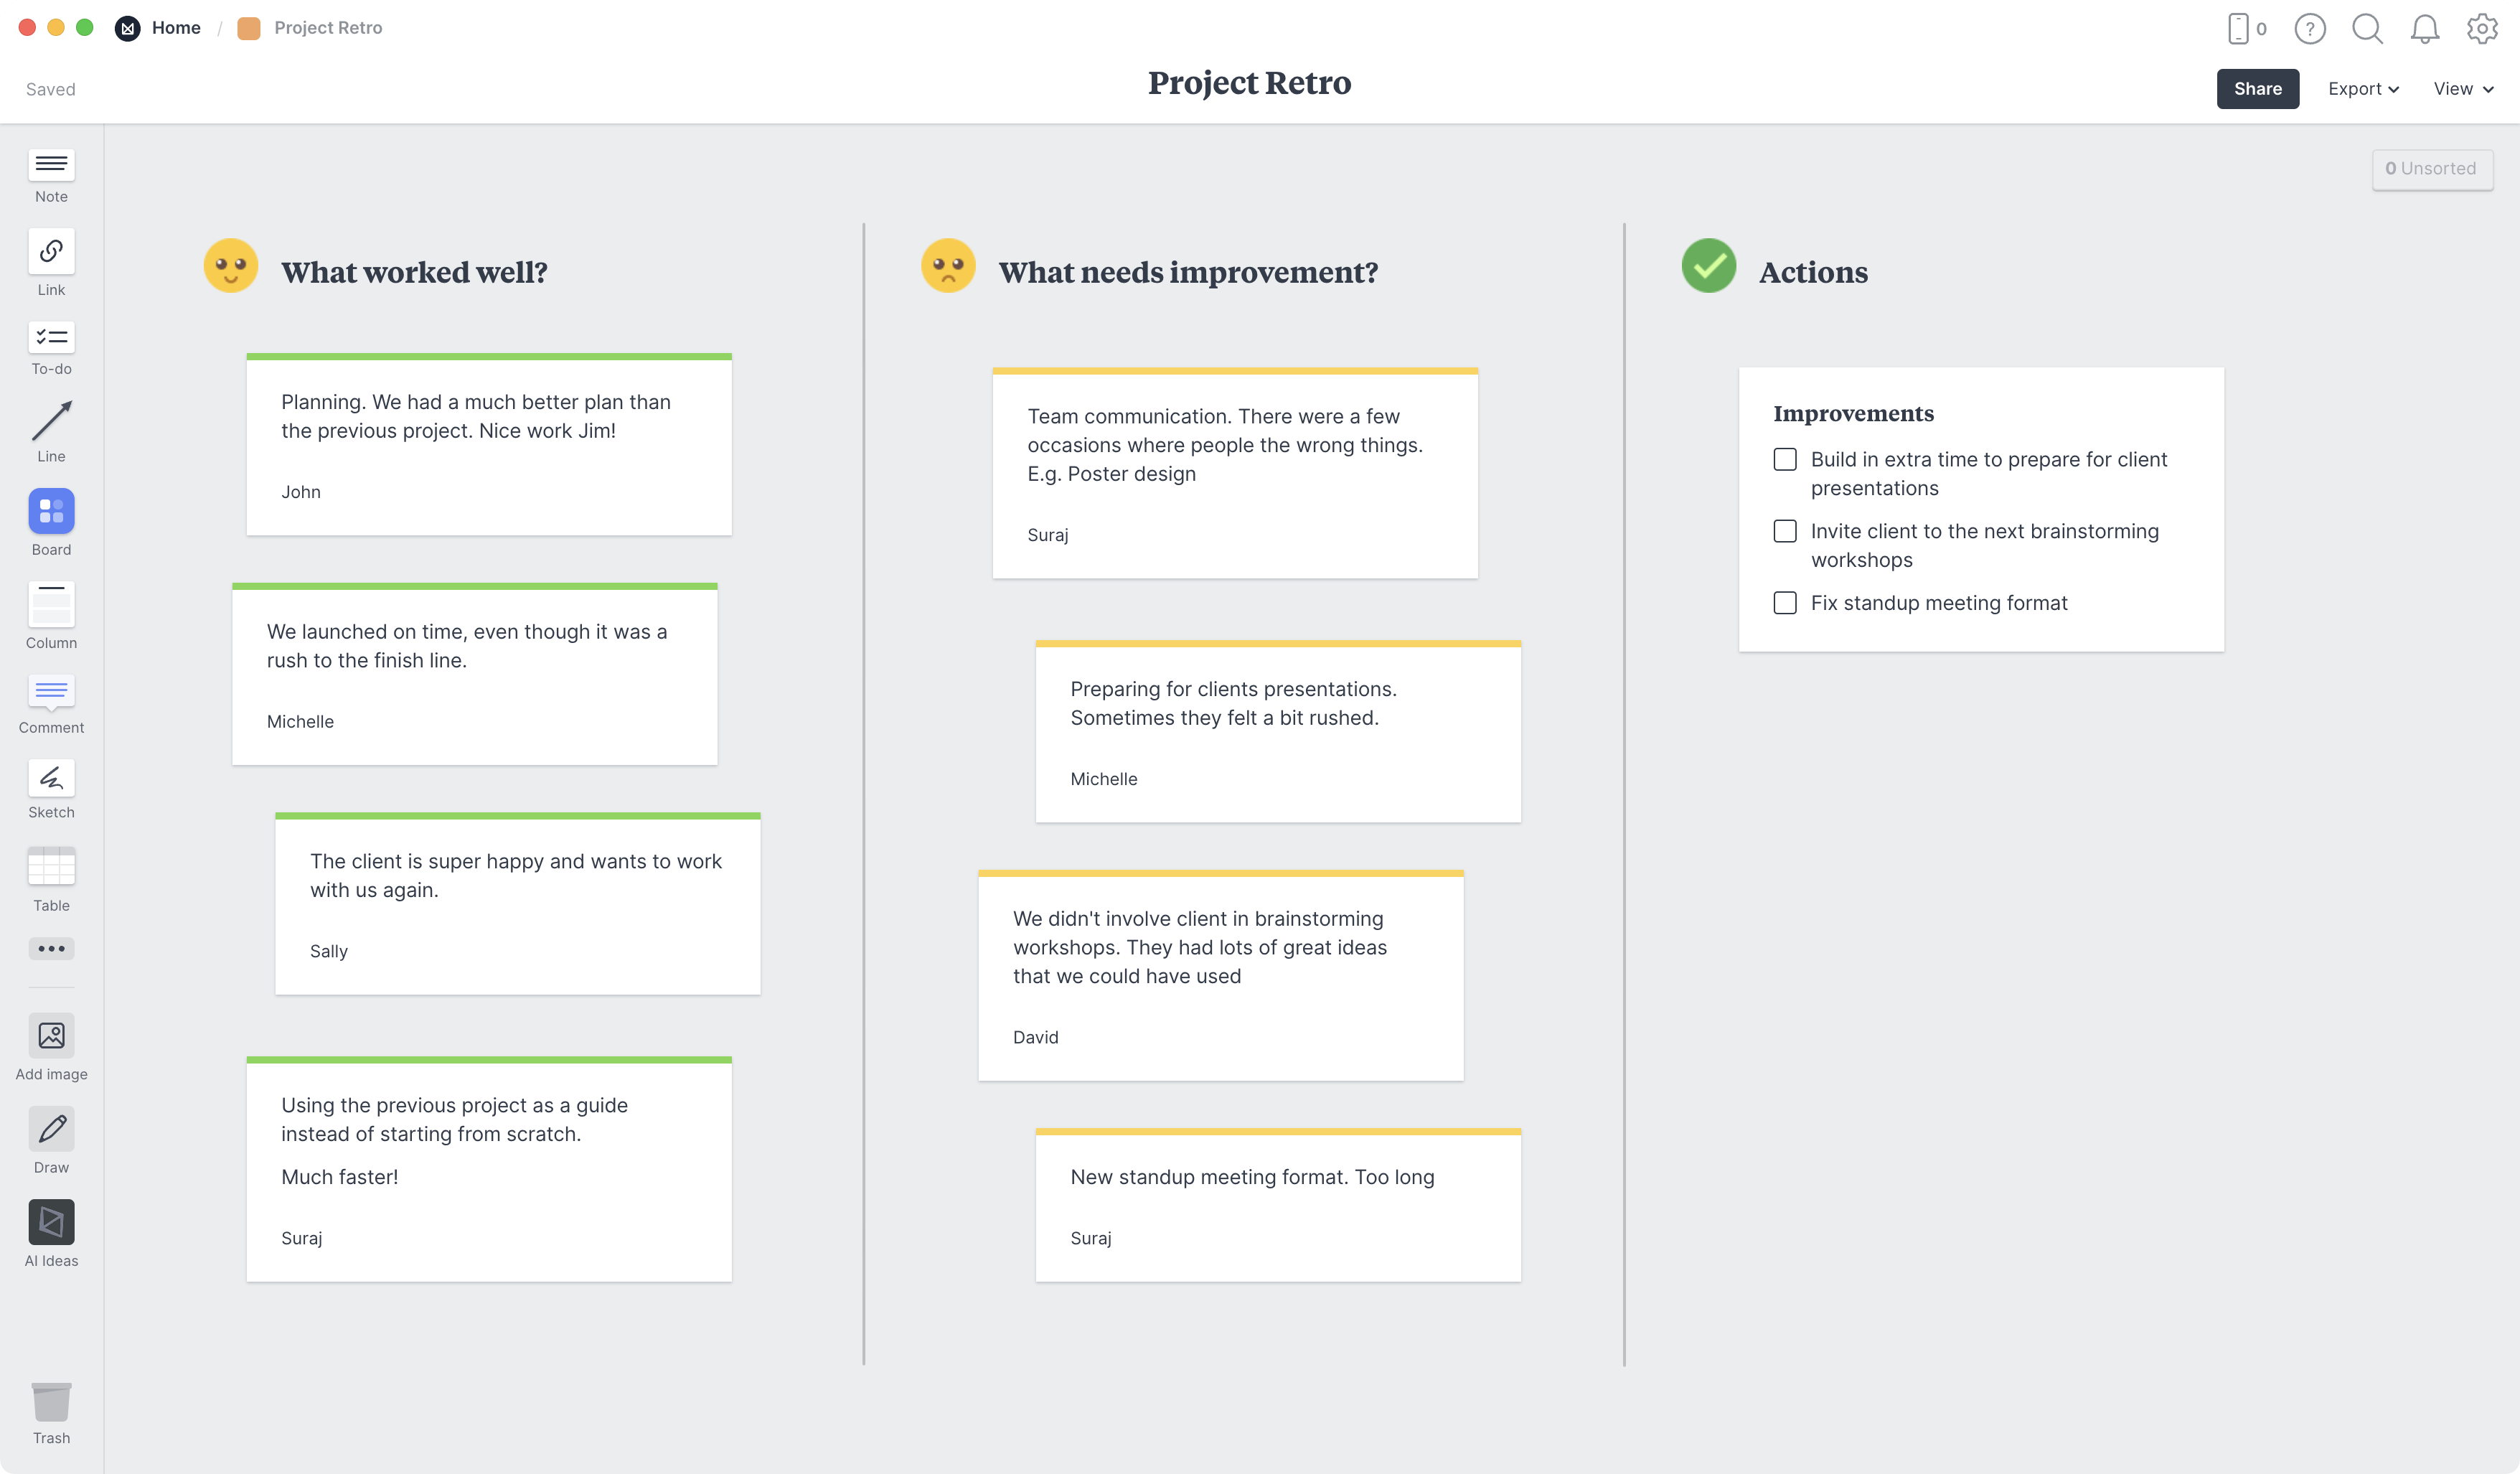 Project Retrospective Template, within the Milanote app